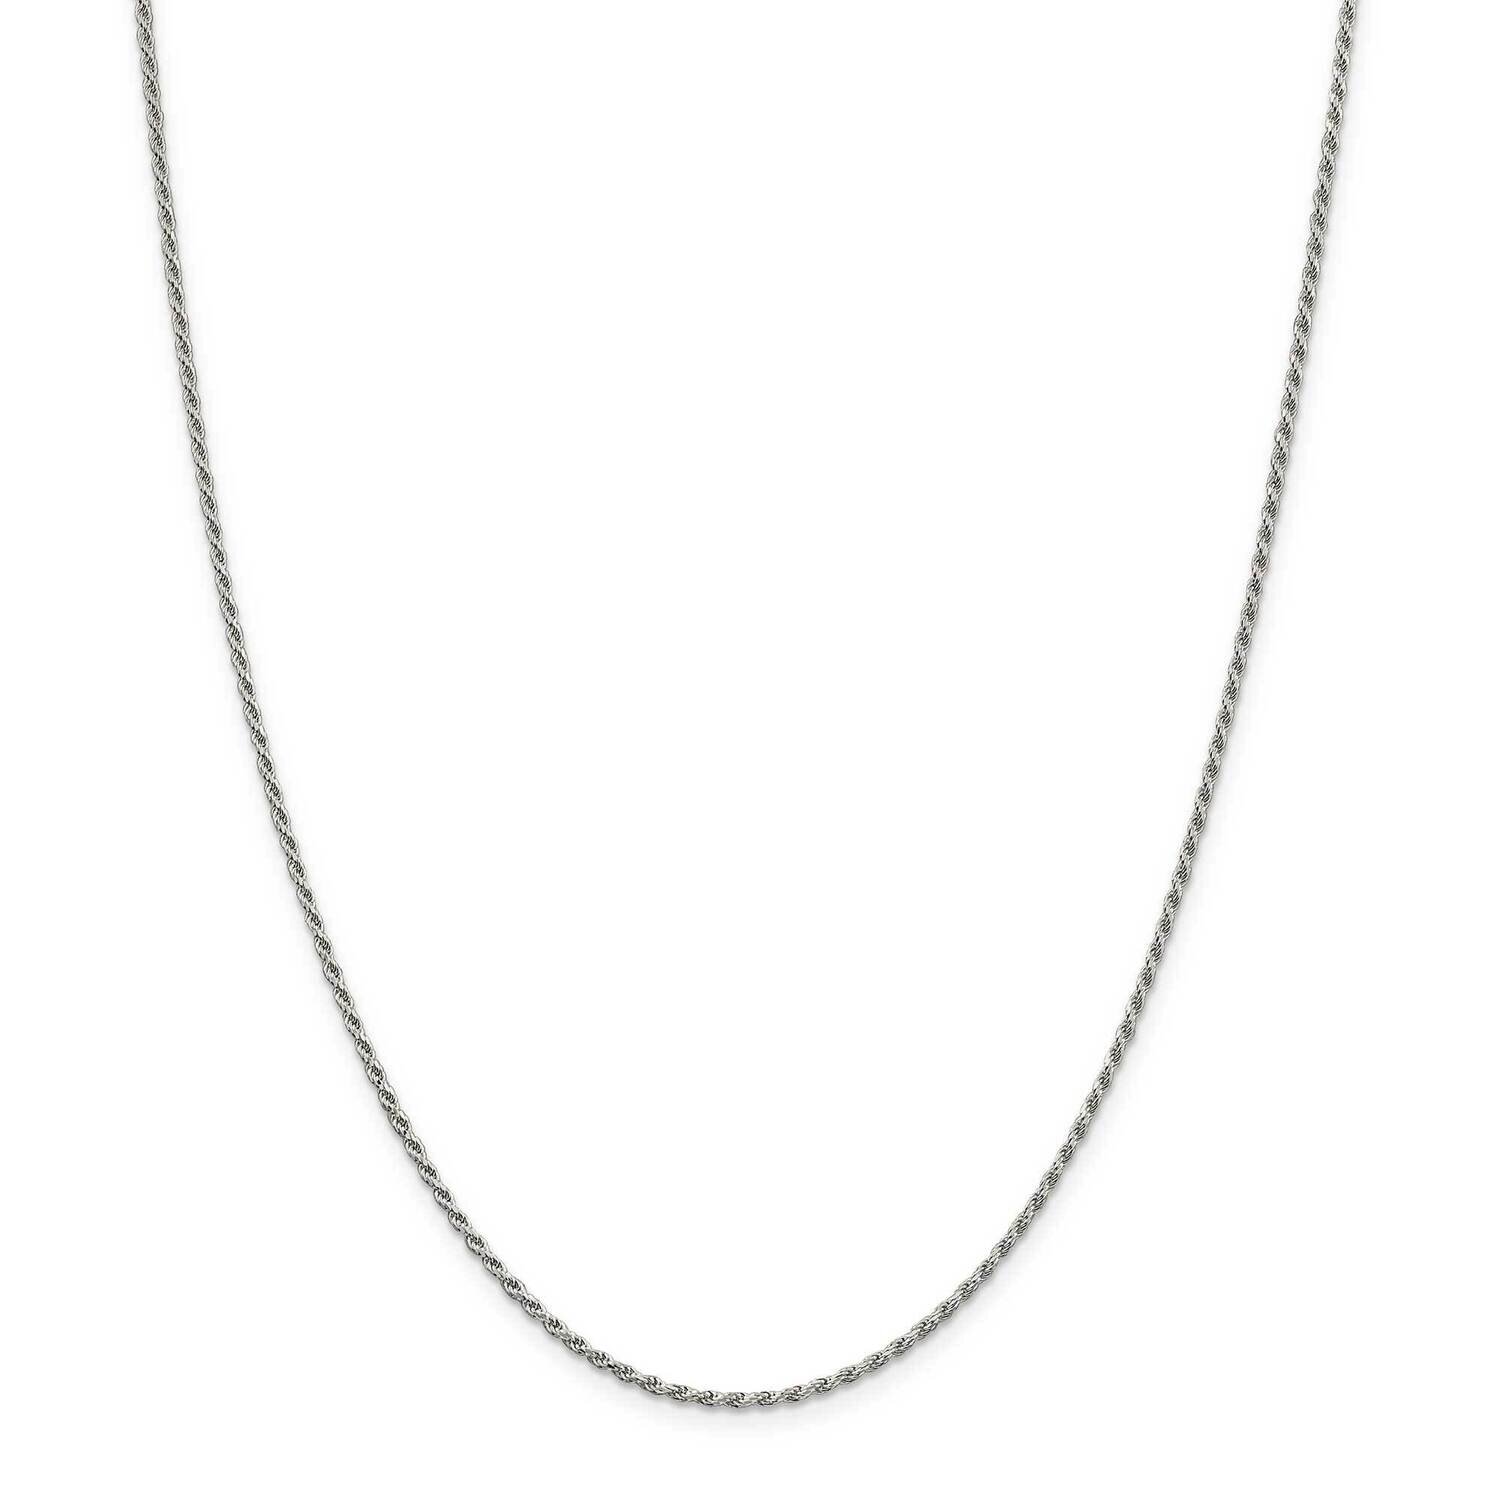 1.7mm Diamond-Cut Rope Chain with 2 Inch Extender 18 Inch Sterling Silver QDC025E-18